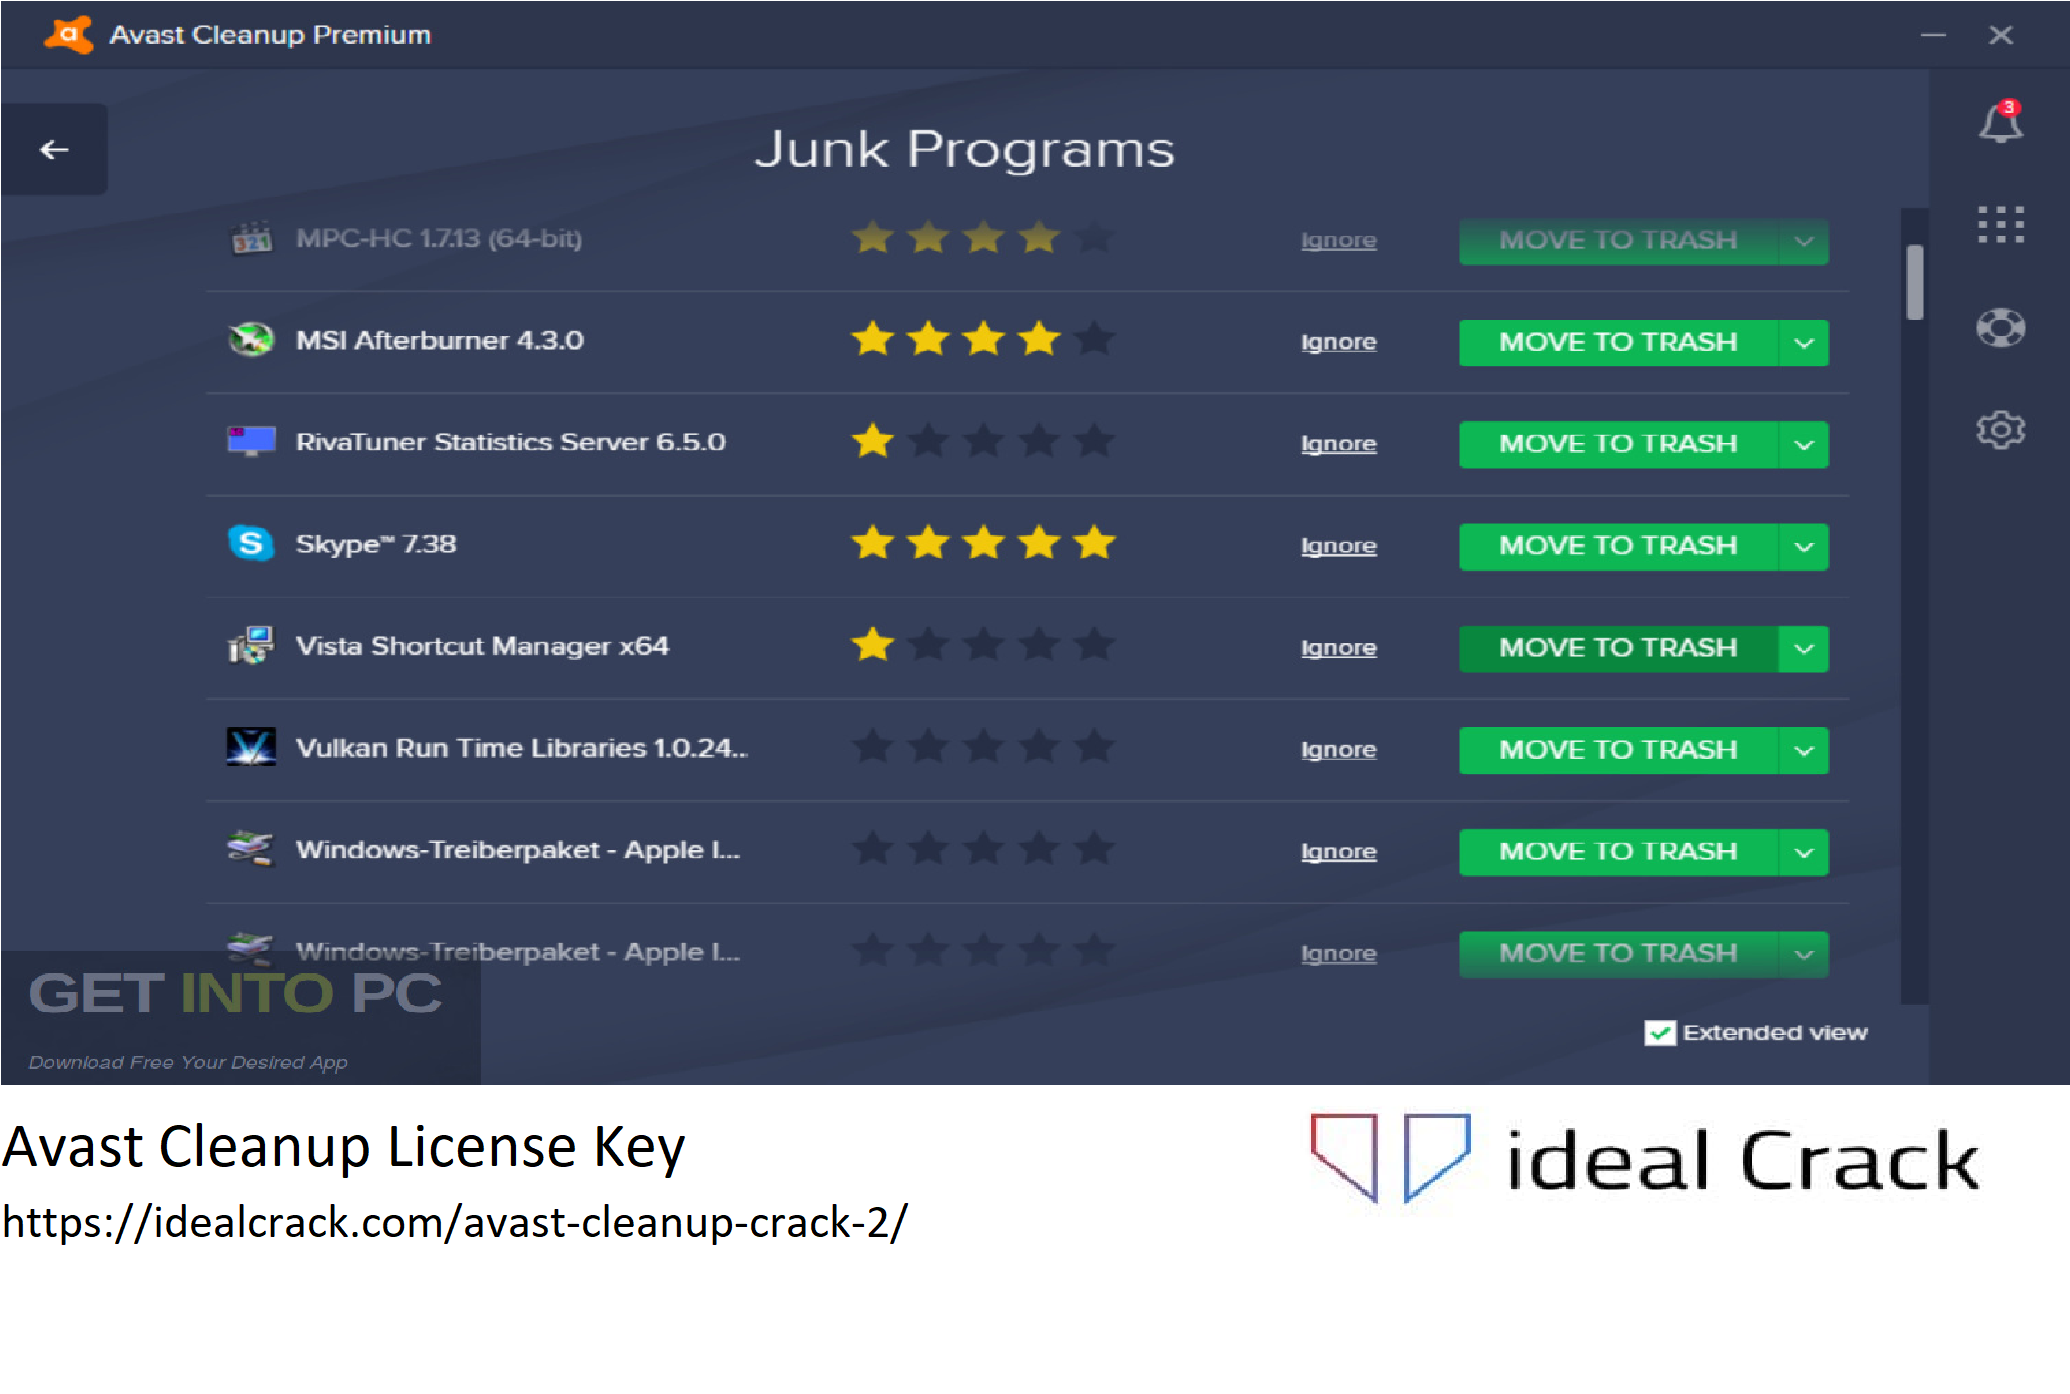 Avast Cleanup License Key